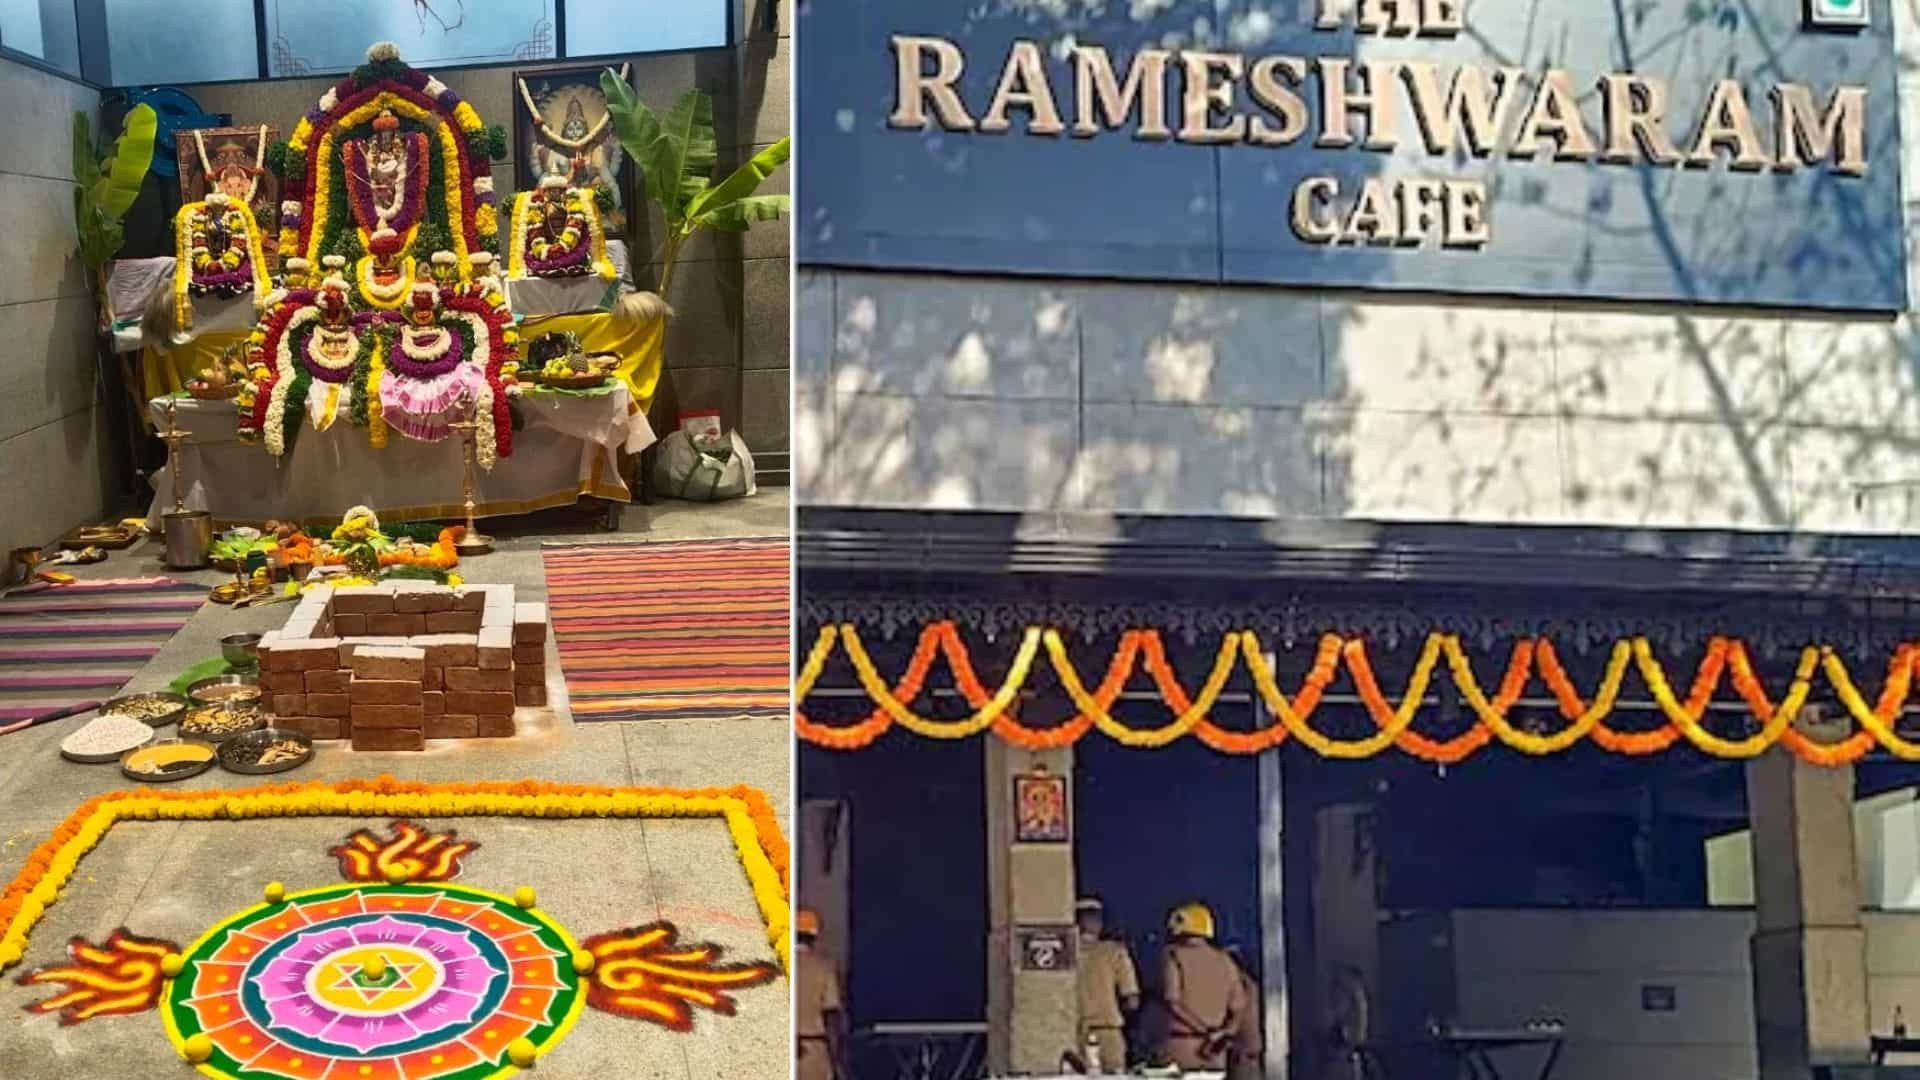 Rameshwaram Cafe: Bengaluru’s indispensable eatery to reopen on March 9 after blast that injured 10